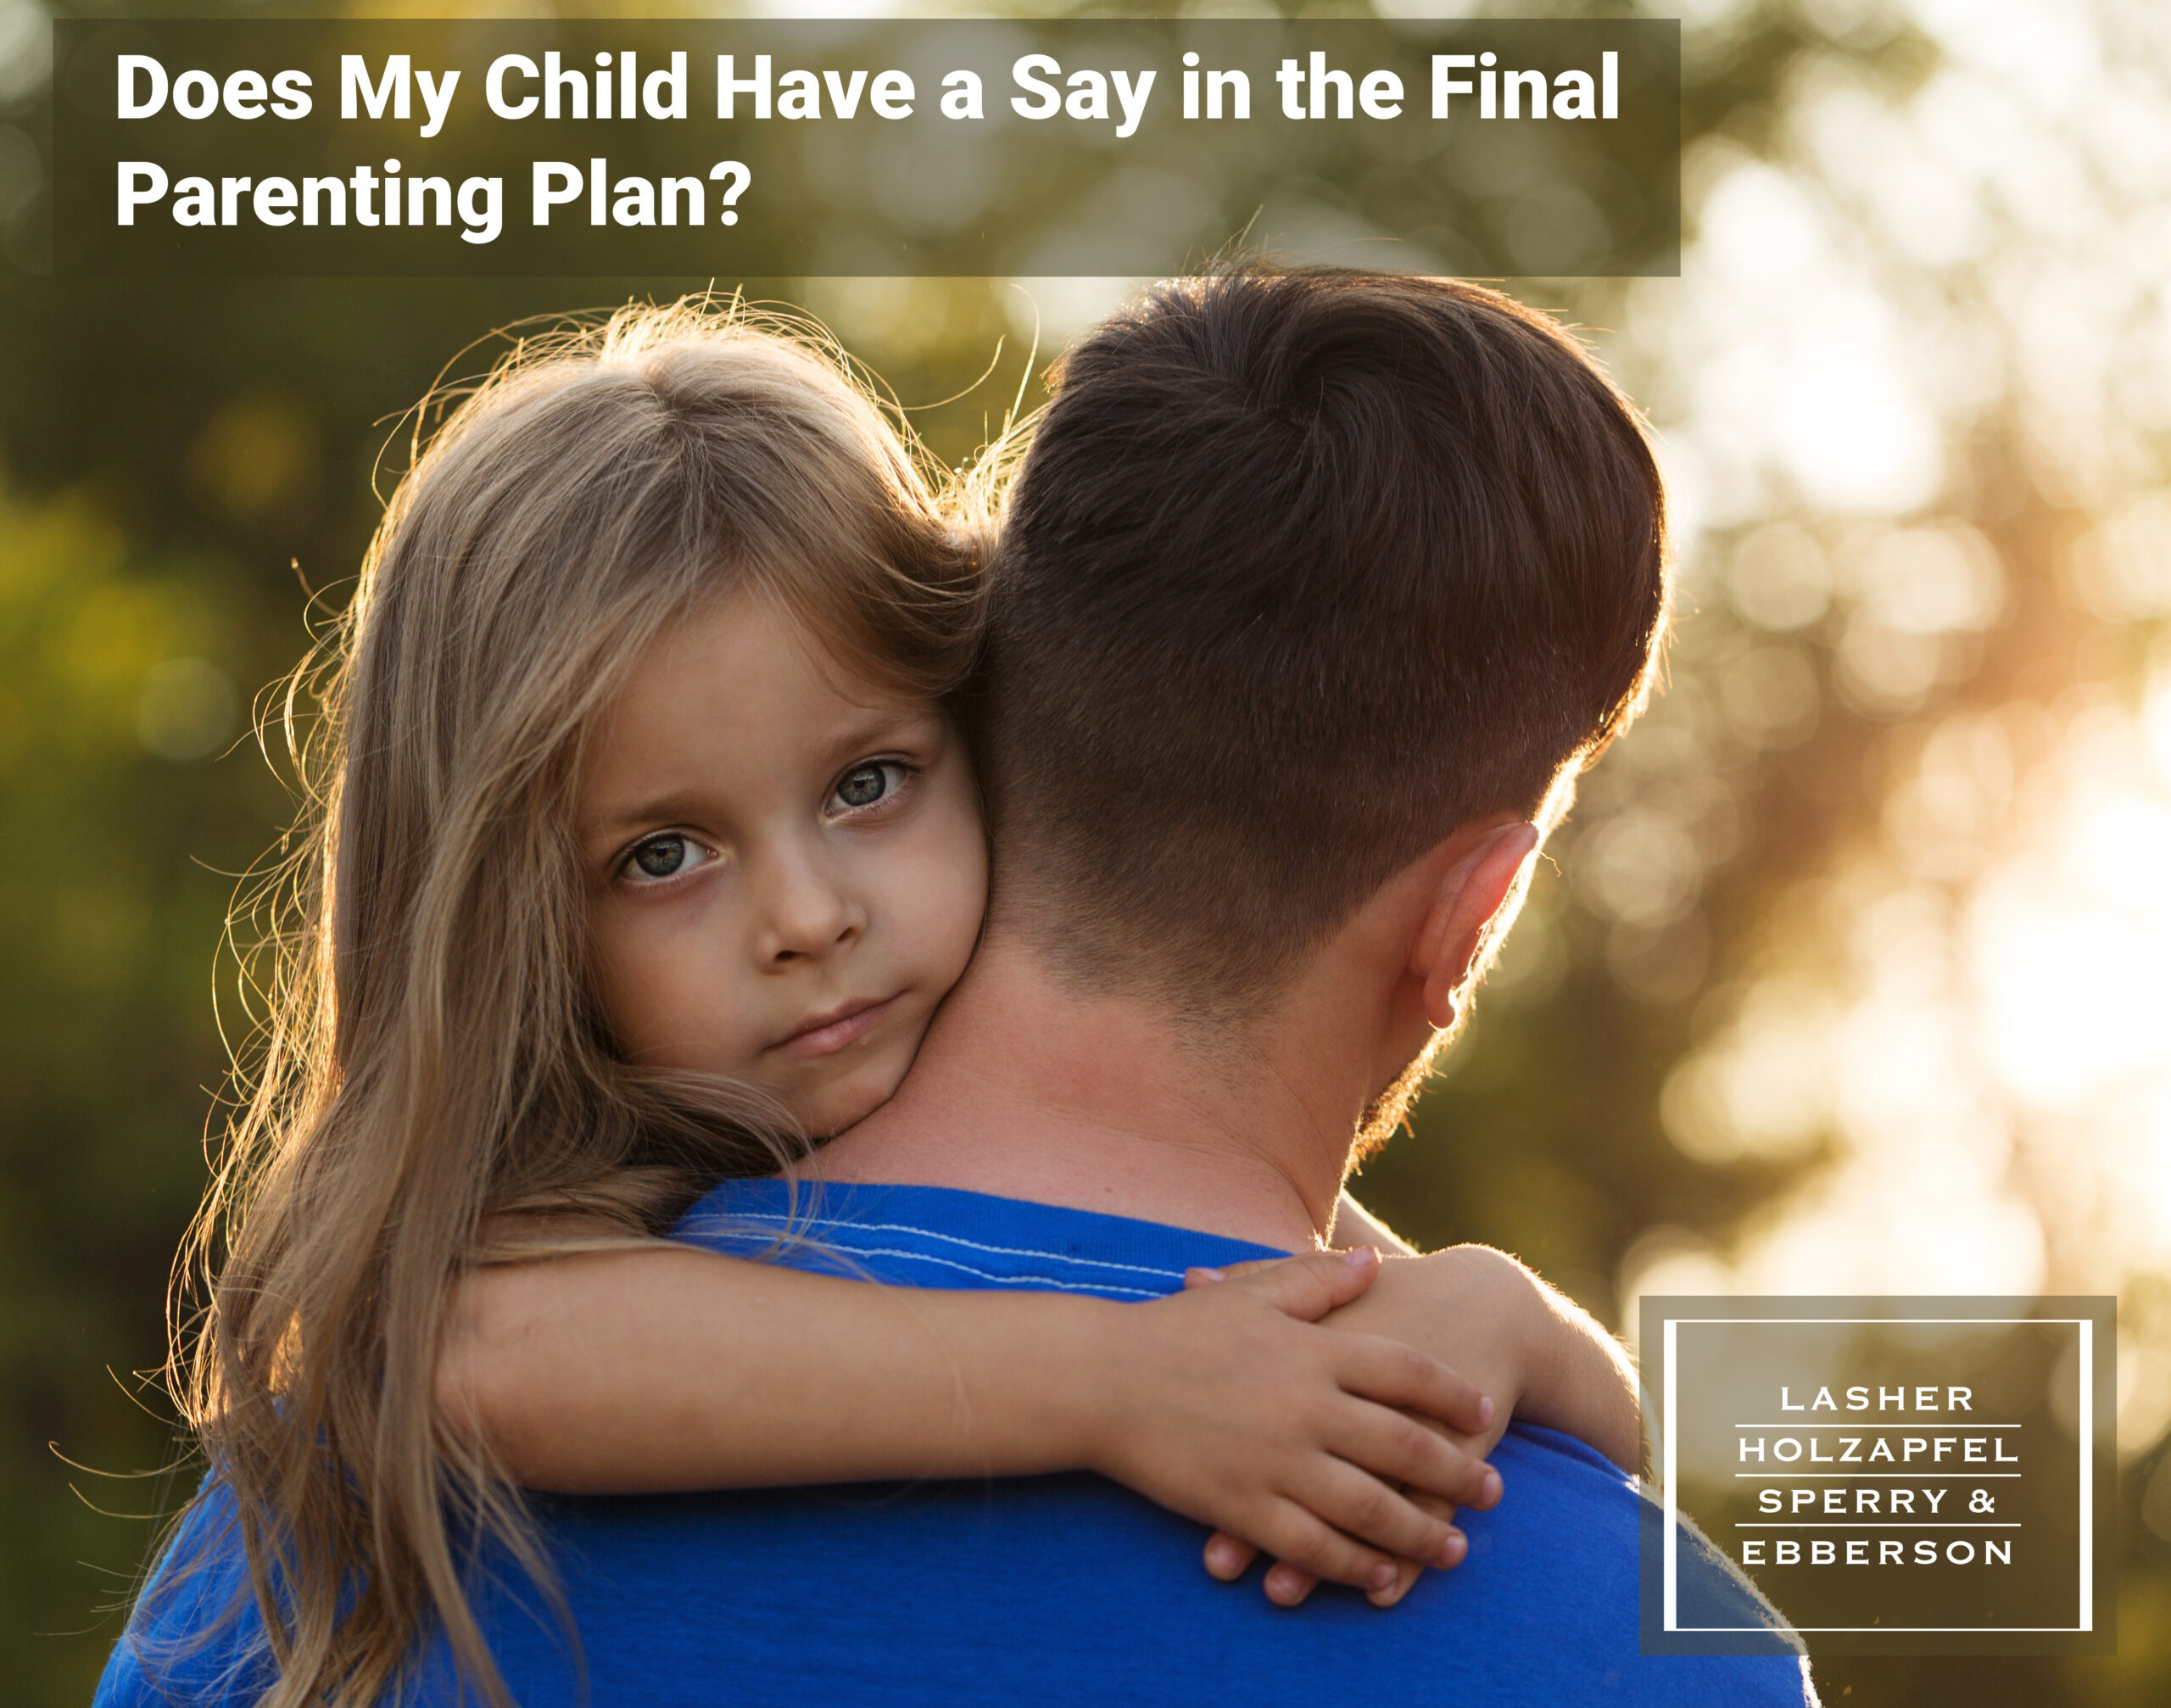 Does My Child Have a Say in the Final Parenting Plan?